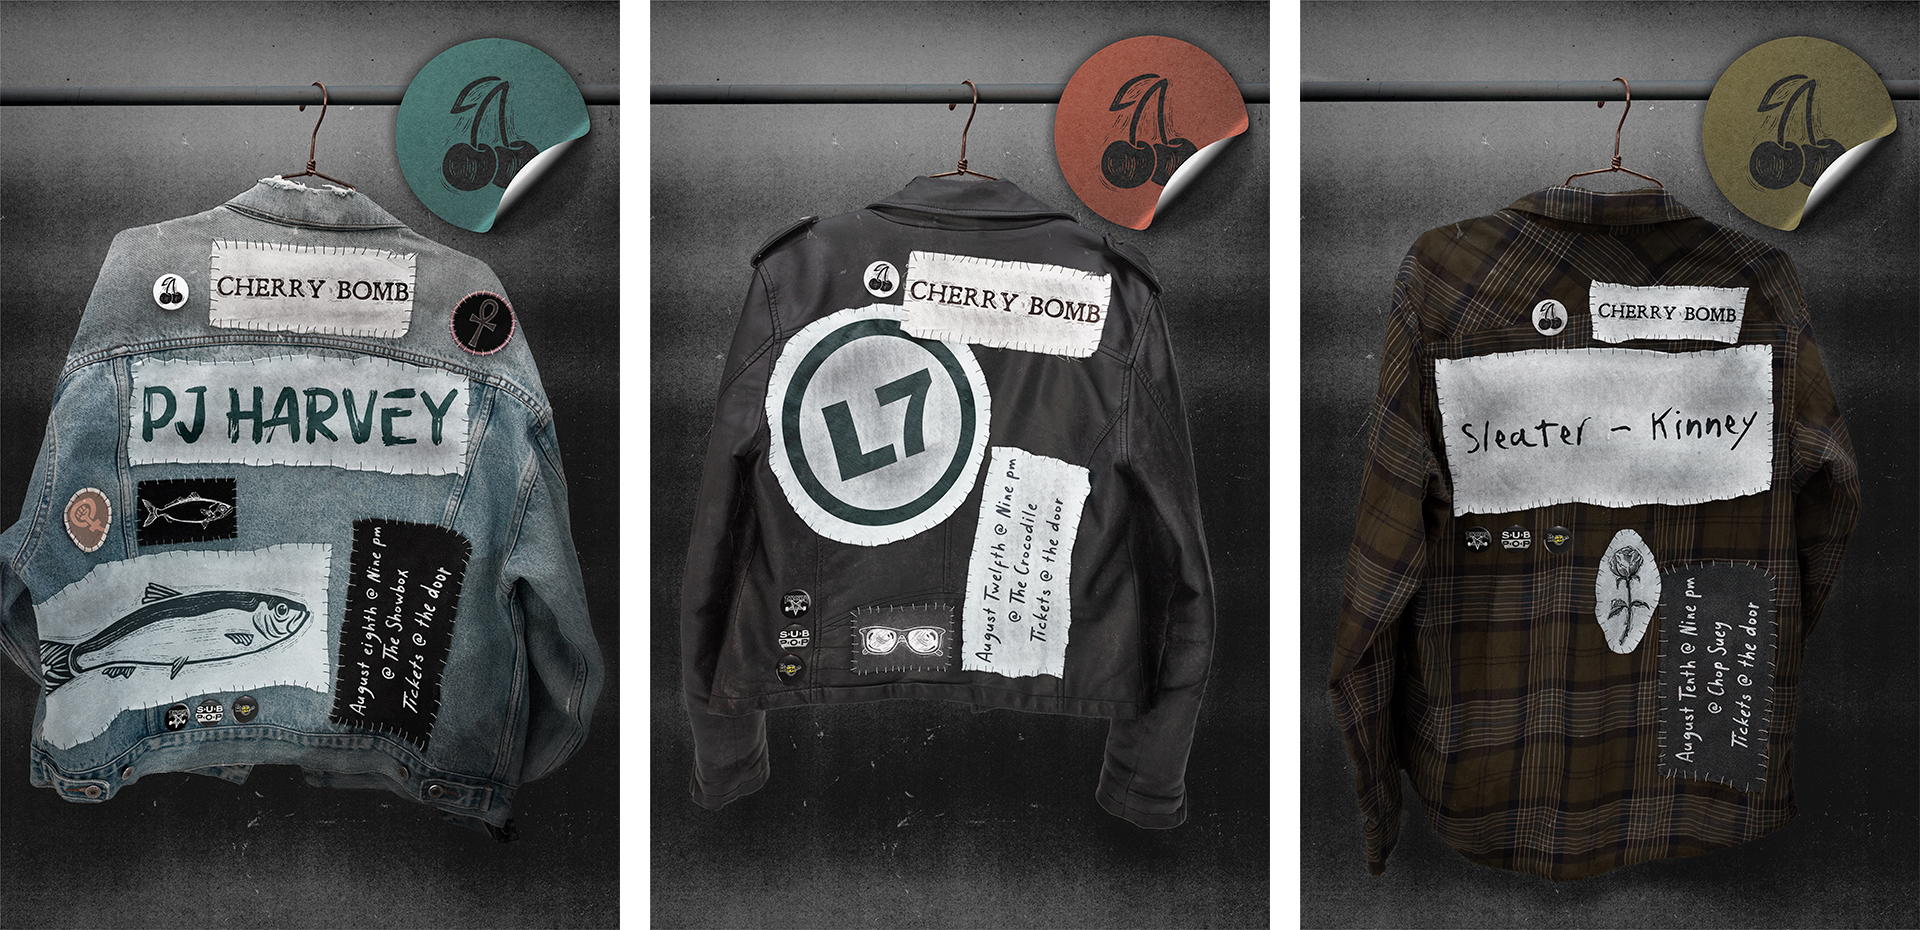 Photography of three jackets featuring pins and patches against a grainy dark background.